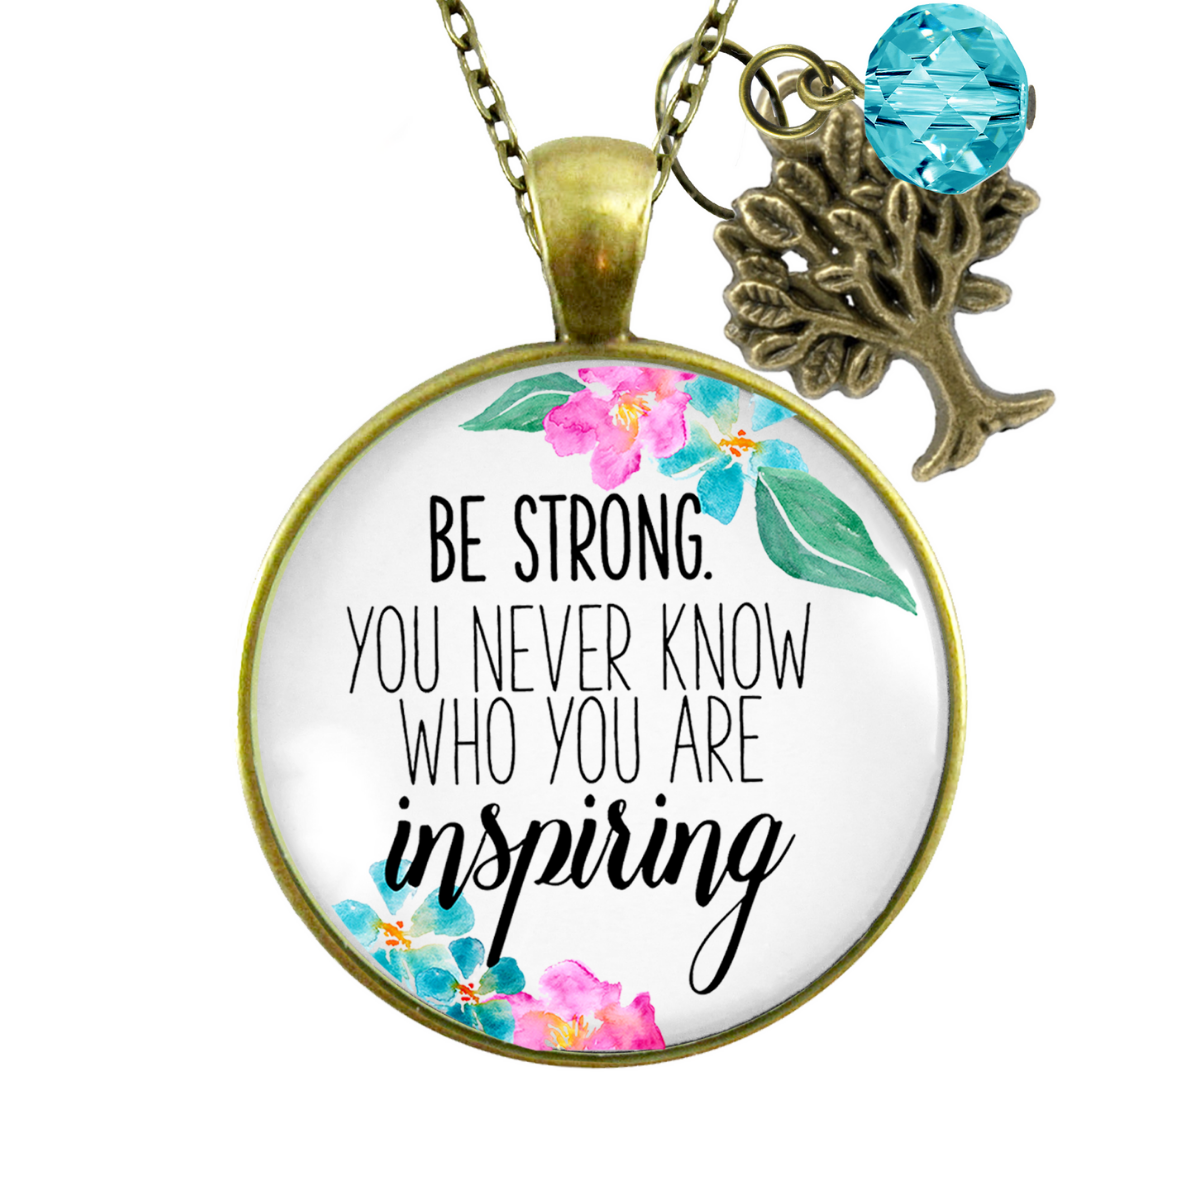 Gutsy Goodness Inspirational Necklace Be Strong You Never Know Meaningful Jewelry - Gutsy Goodness Handmade Jewelry;Inspirational Necklace Be Strong You Never Know Meaningful Jewelry - Gutsy Goodness Handmade Jewelry Gifts